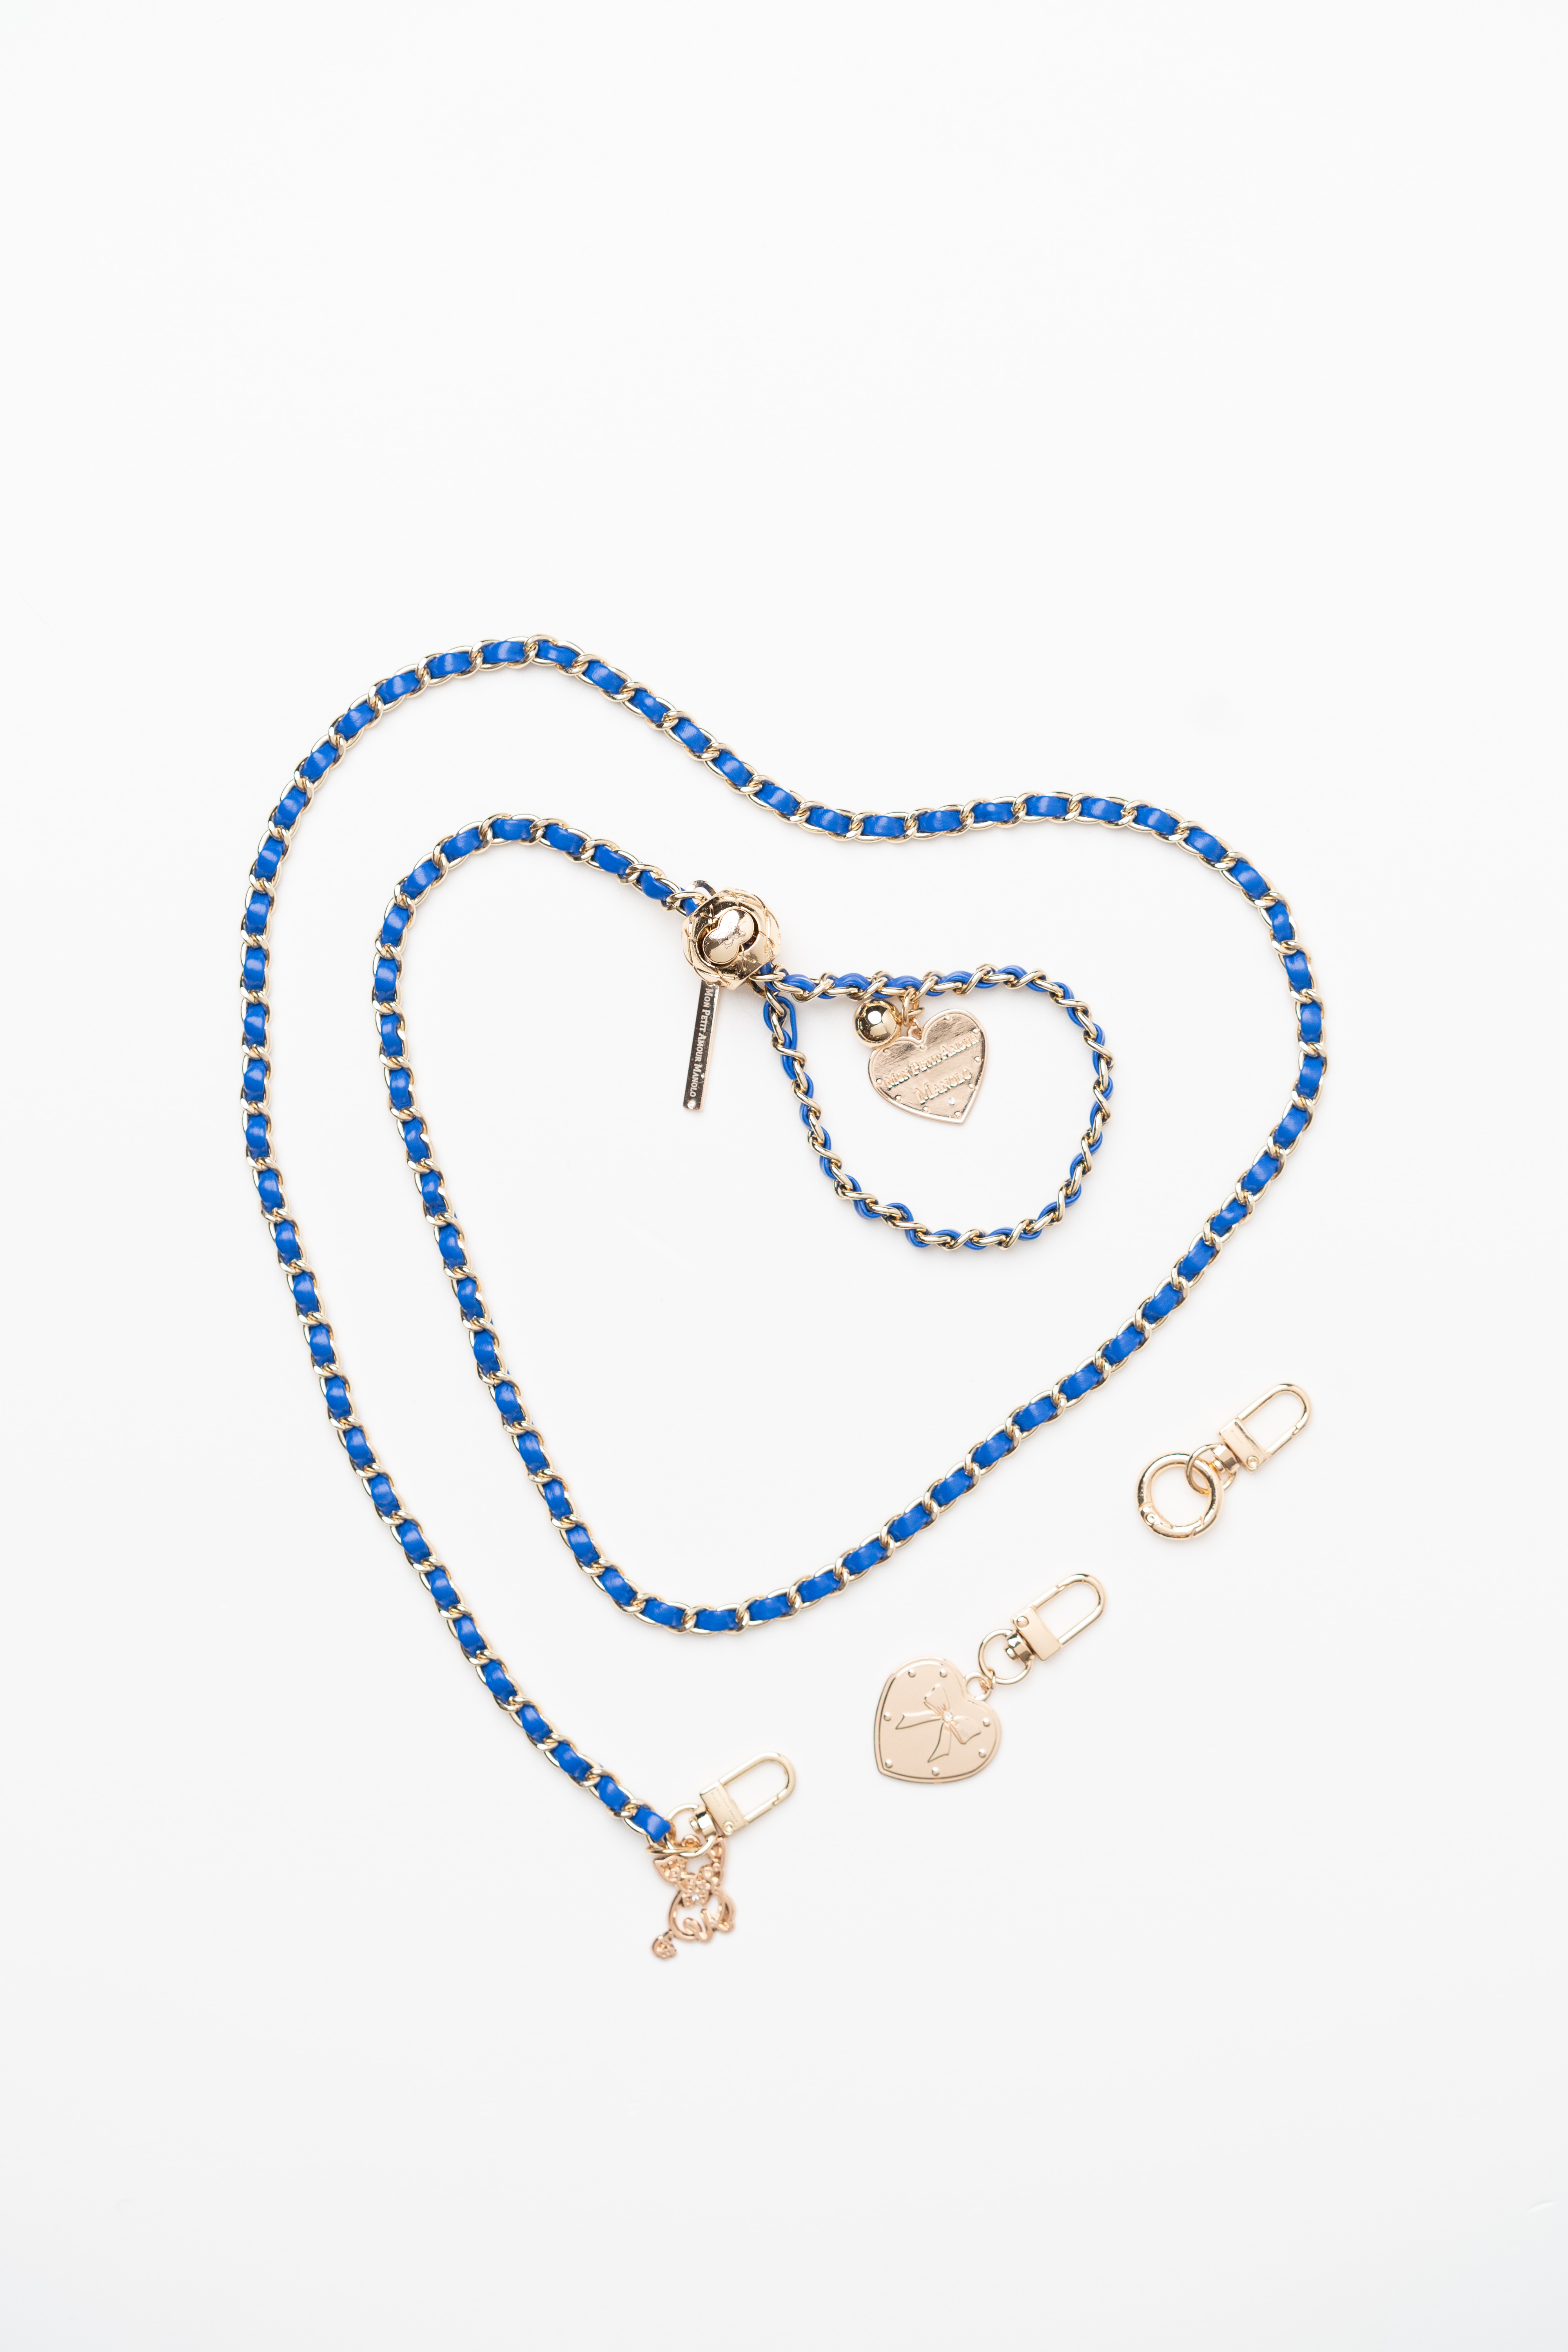 a blue and gold chain with a heart shaped charm